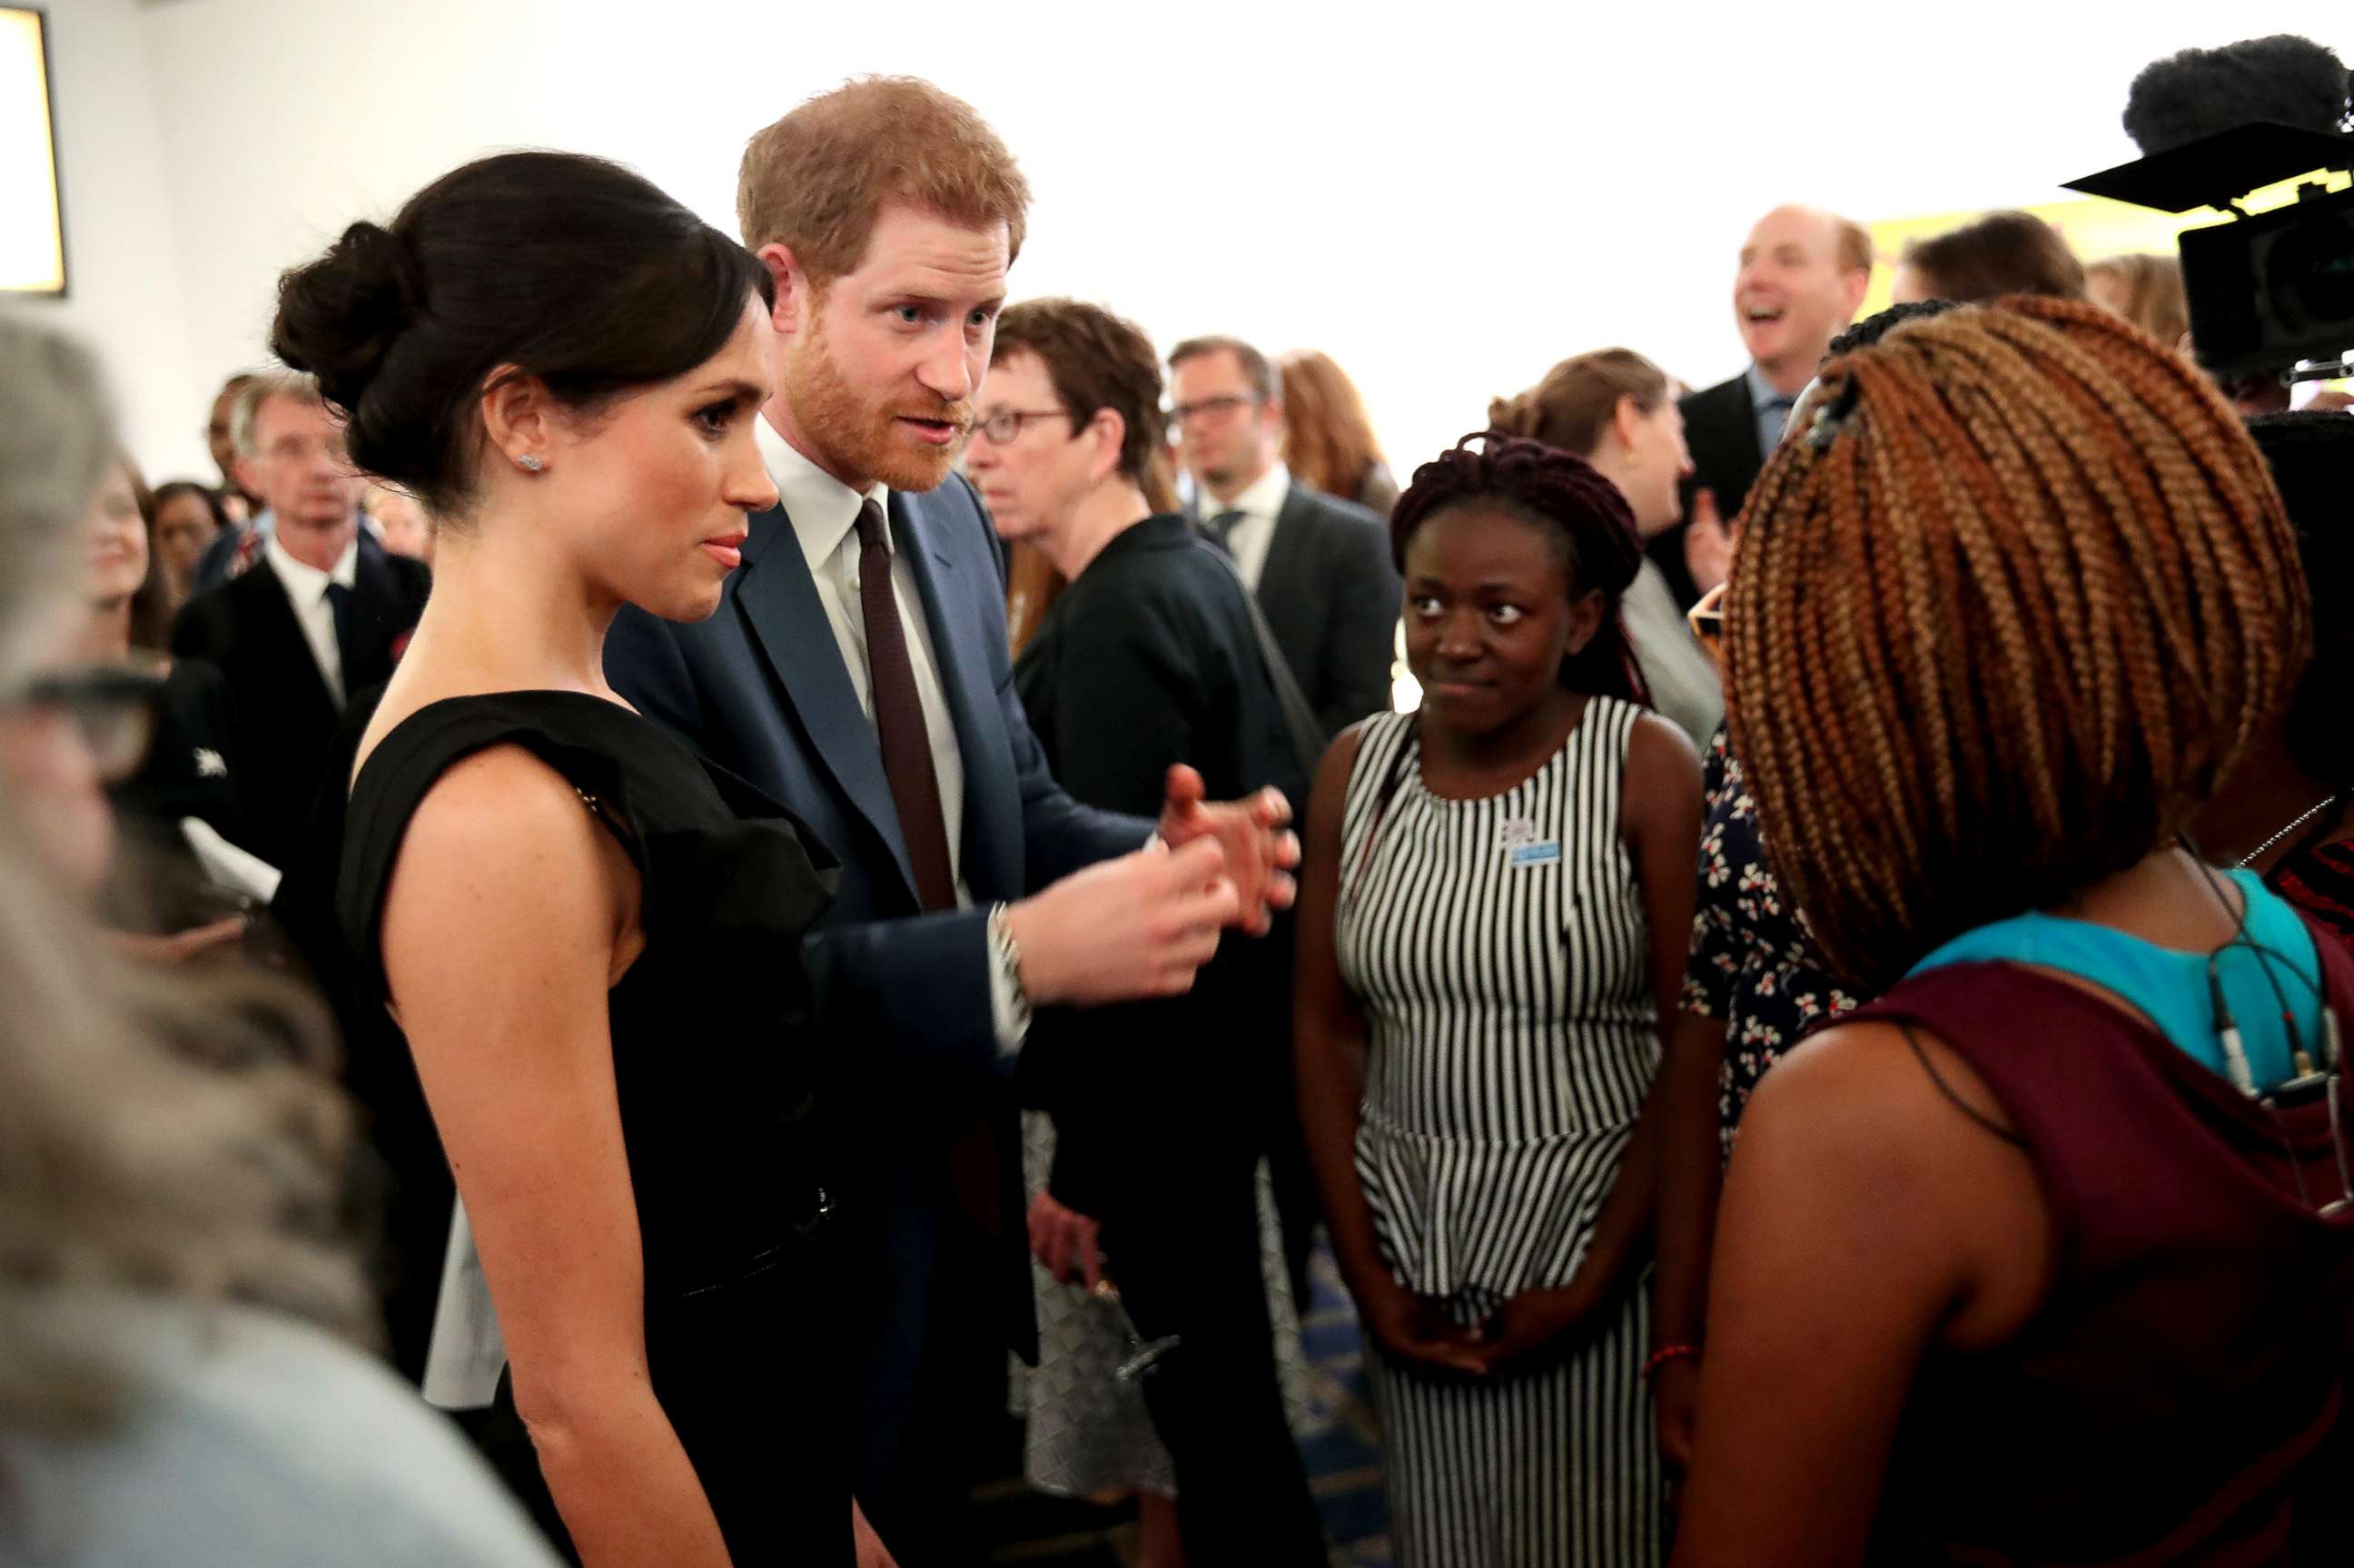 PHOTO: Meghan Markle and Prince Harry speaks with guests as they attend the Women's Empowerment reception at the Royal Aeronautical Society, April 19, 2018, in London.